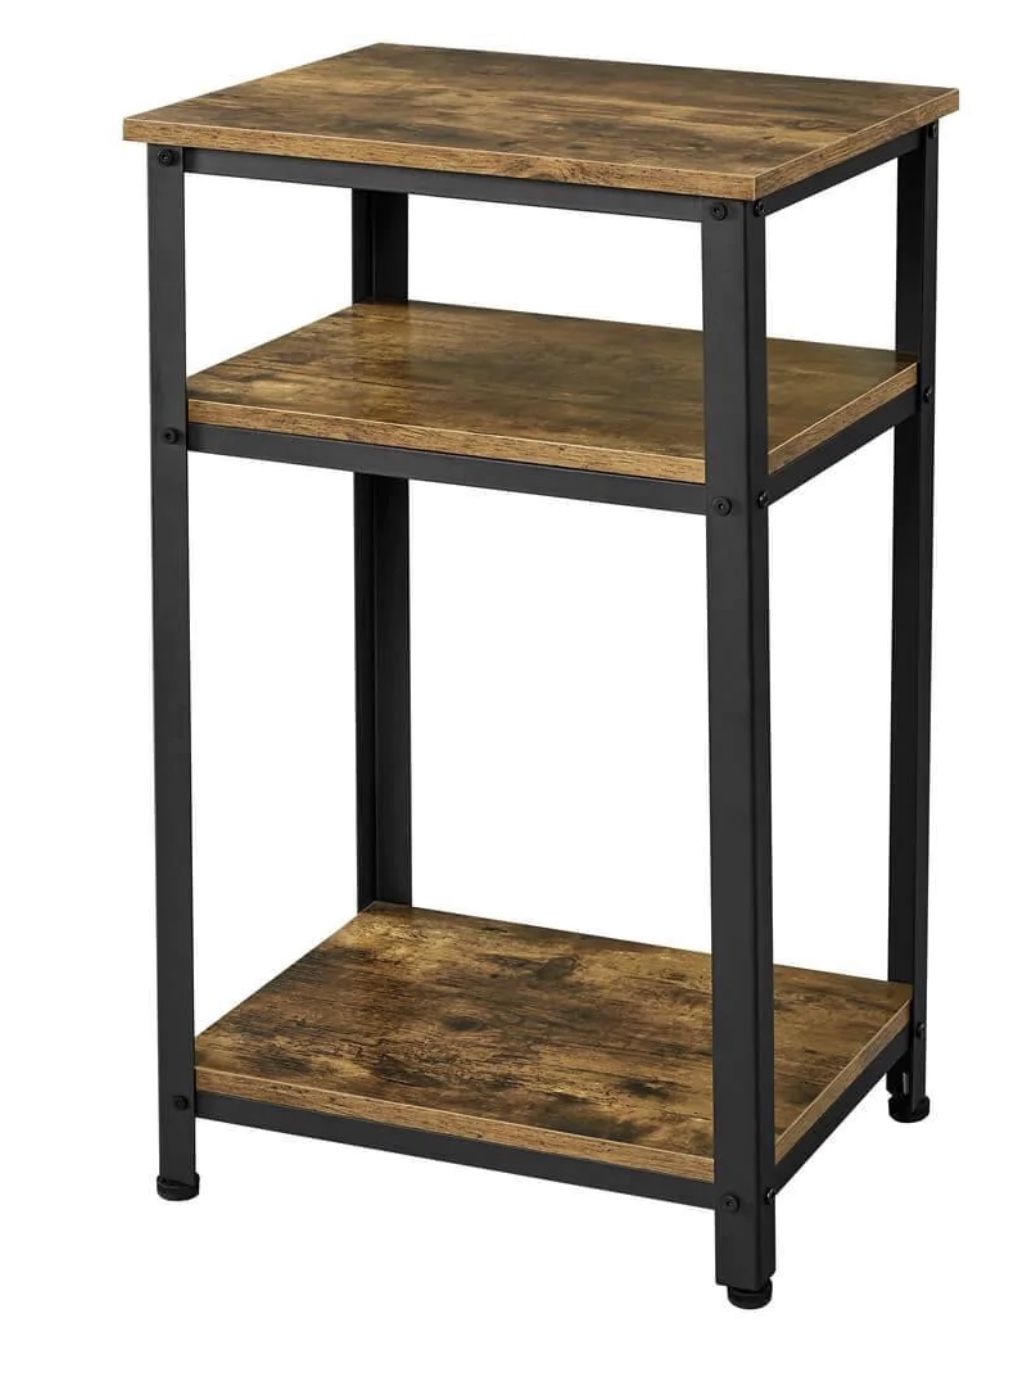 Side Table with Storage Shelves 592013